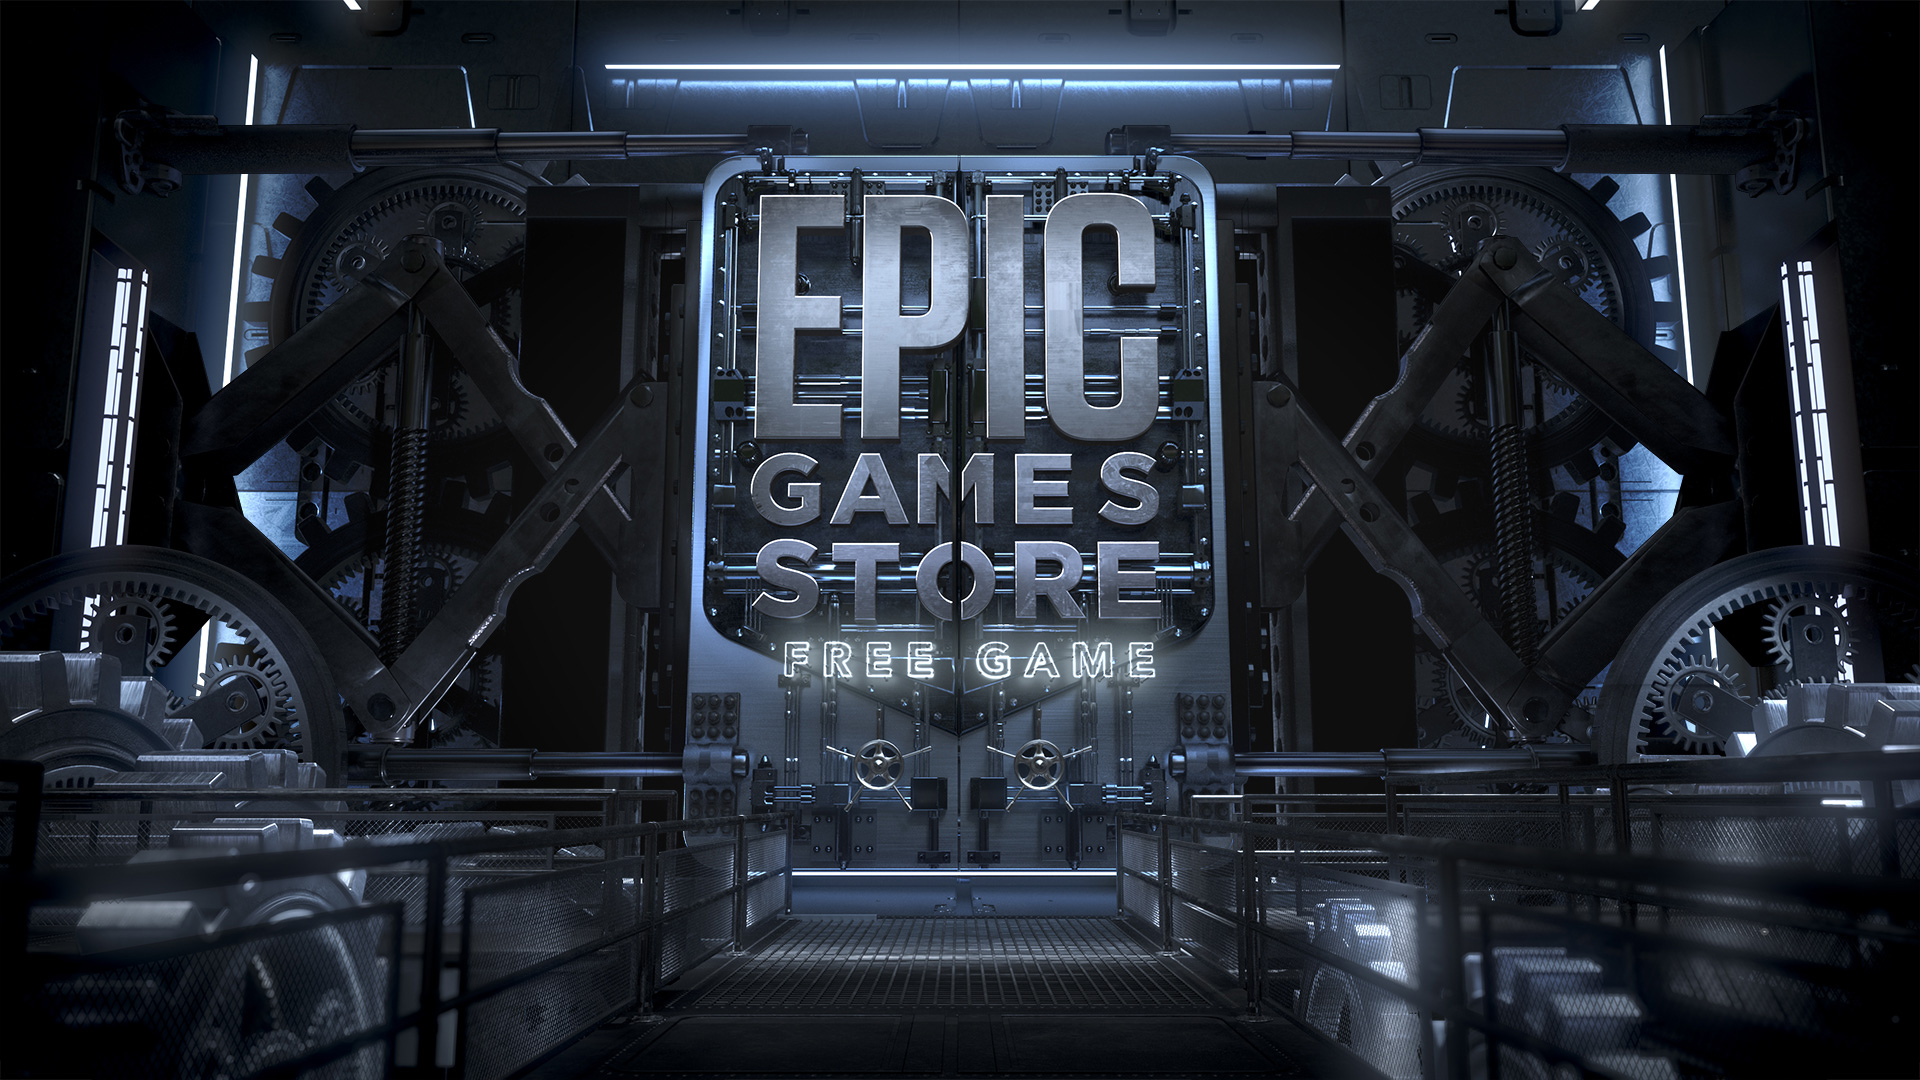 Epic Games wallpapers for desktop, download free Epic Games pictures and  backgrounds for PC 